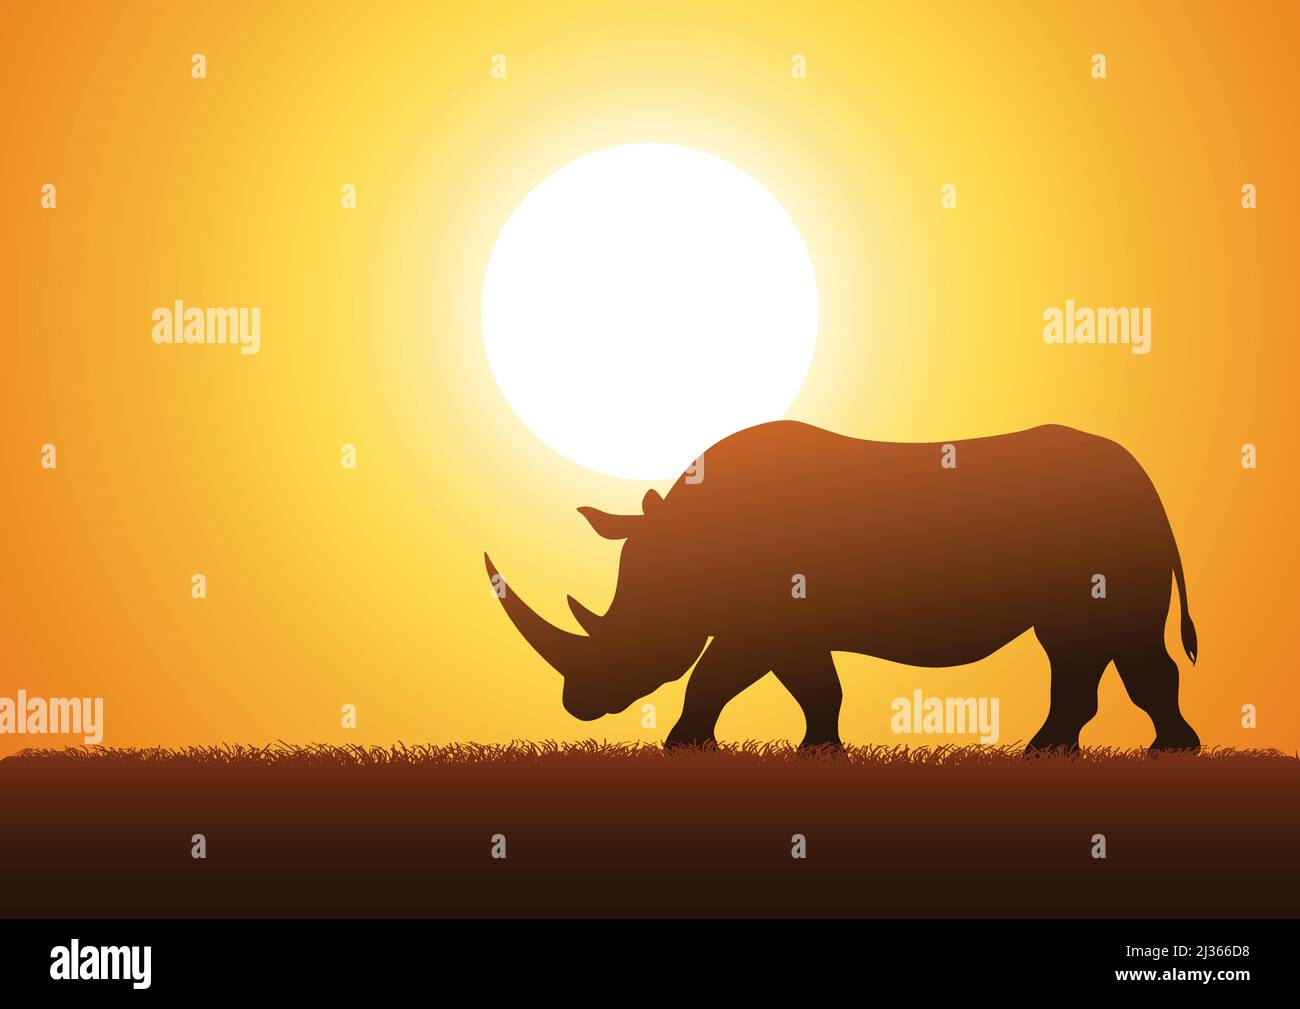 Silhouette illustration of a rhinoceros against sunset background Stock Vector